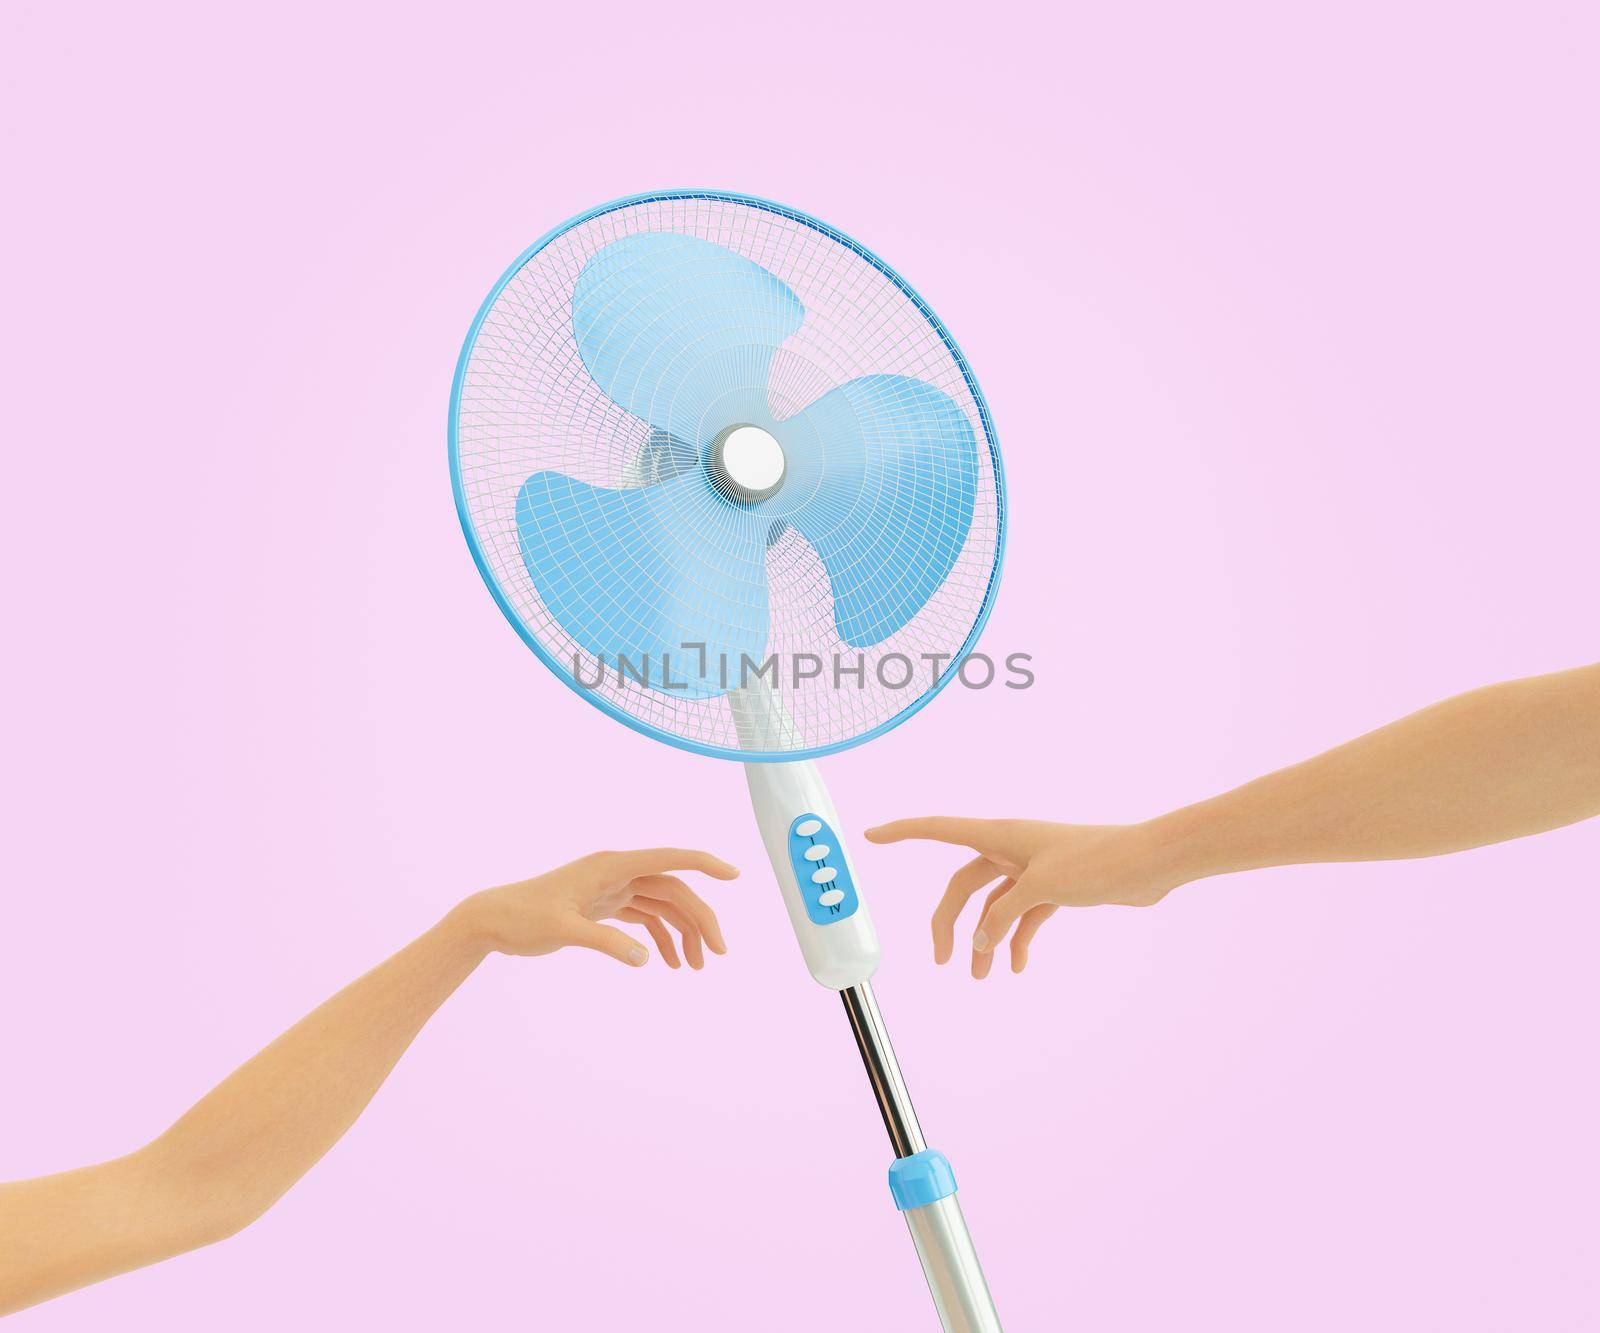 3D illustration of people outstretching arms to control buttons of fan on hot day against lilac background